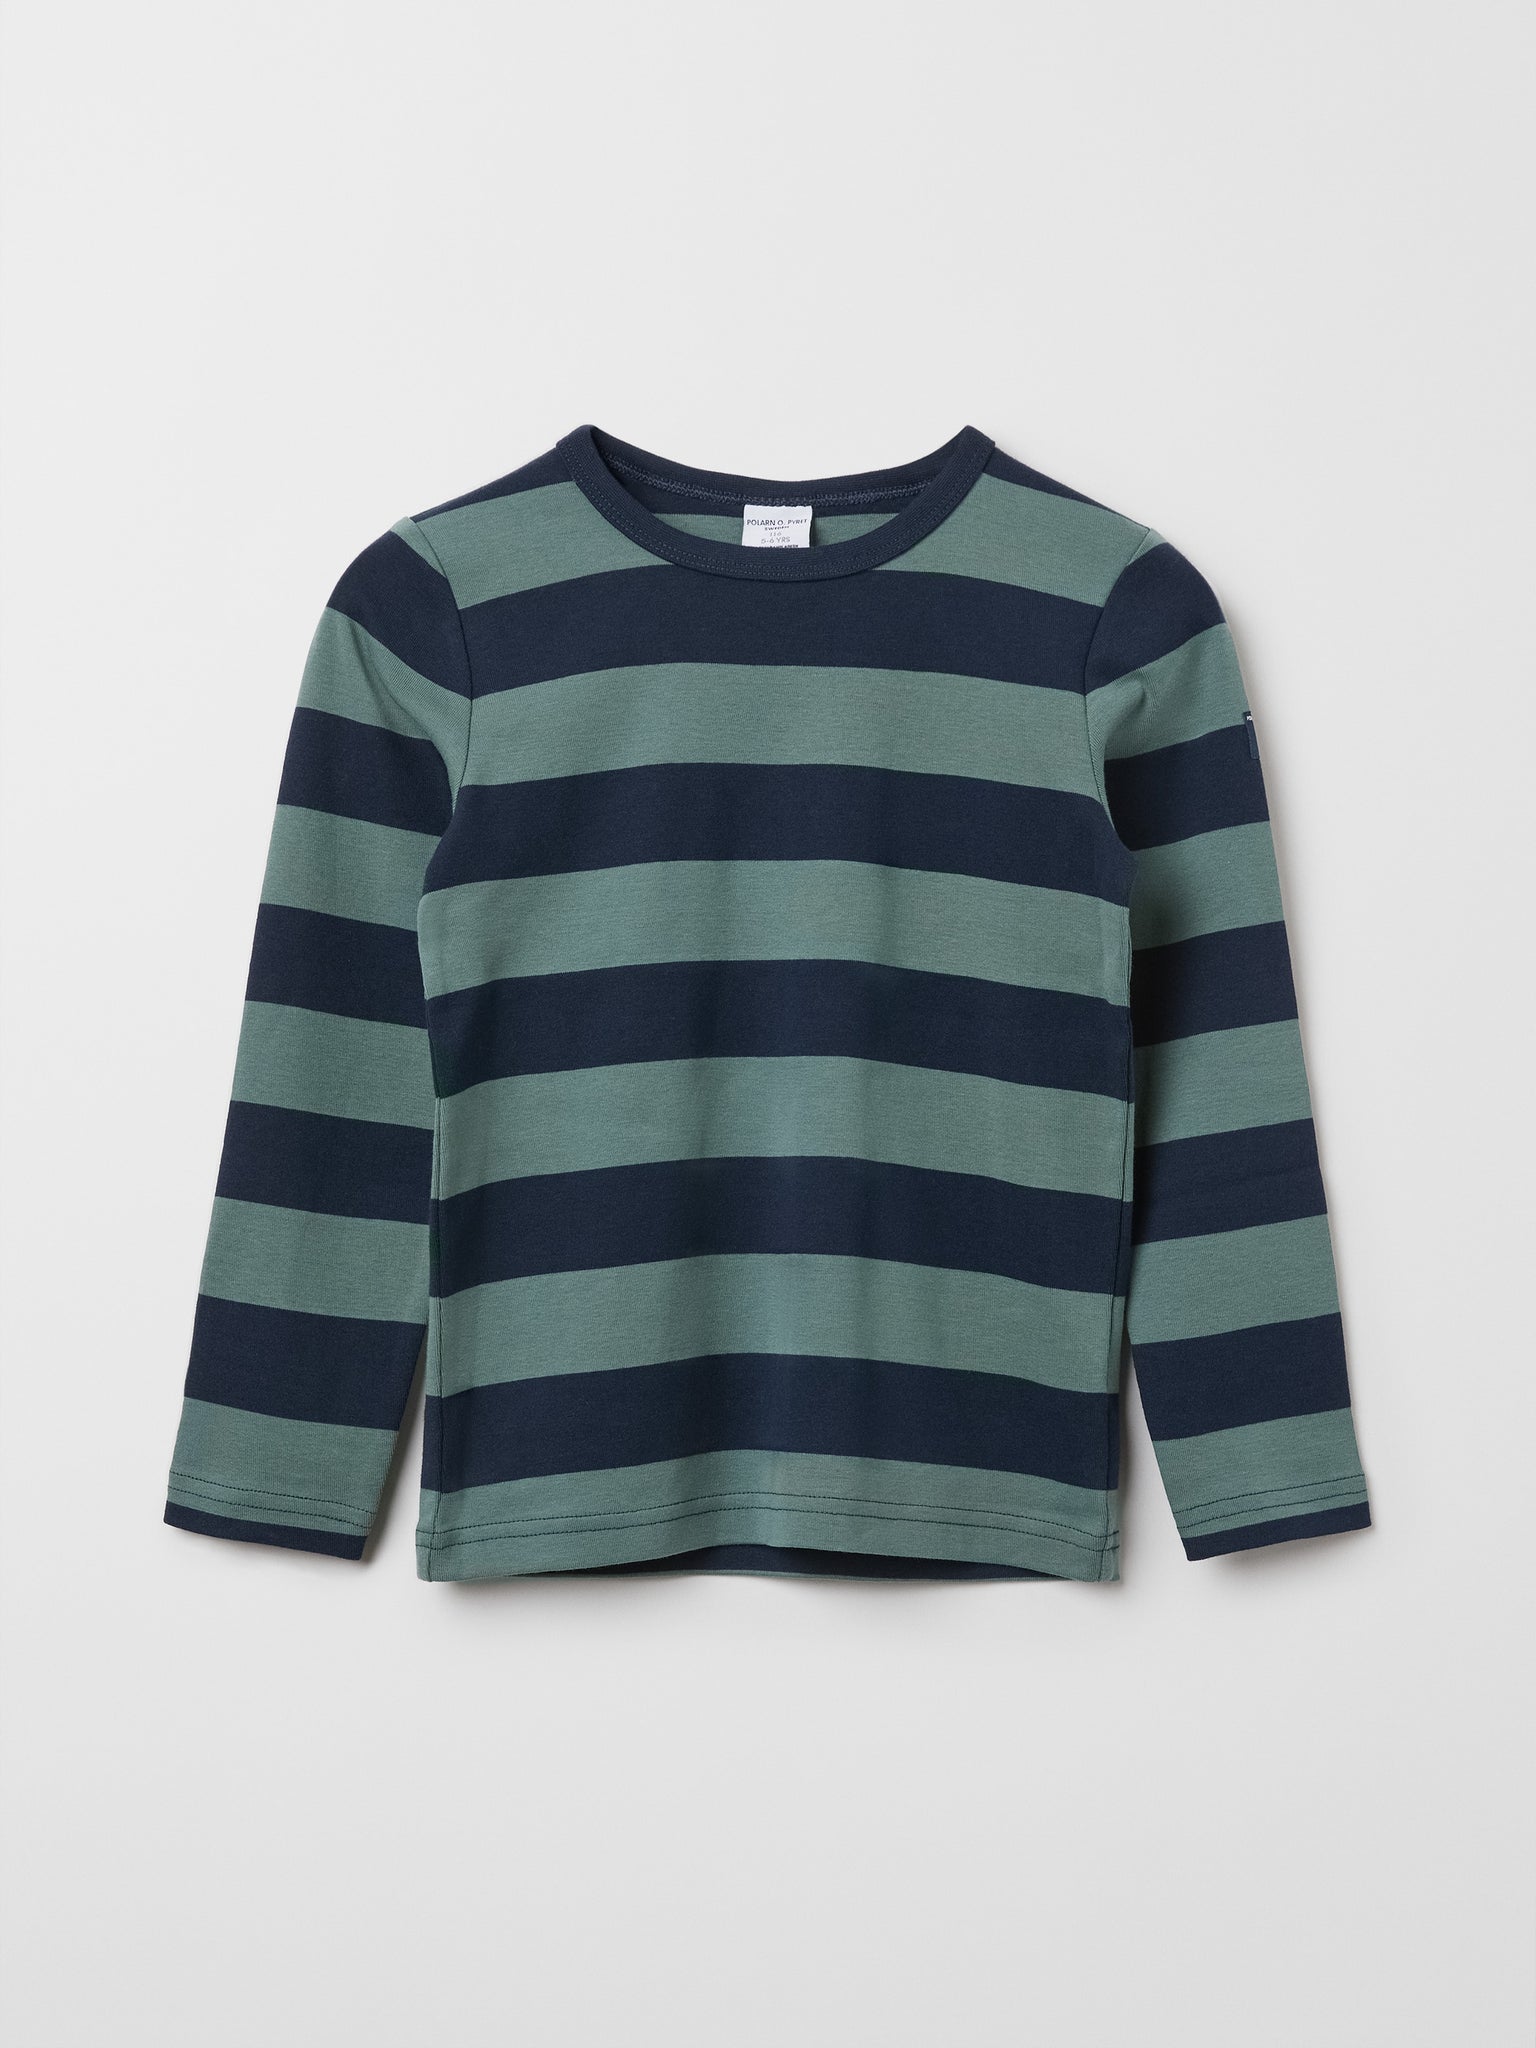 Organic Cotton Green Striped Kids Top from the Polarn O. Pyret kidswear collection. The best ethical kids clothes